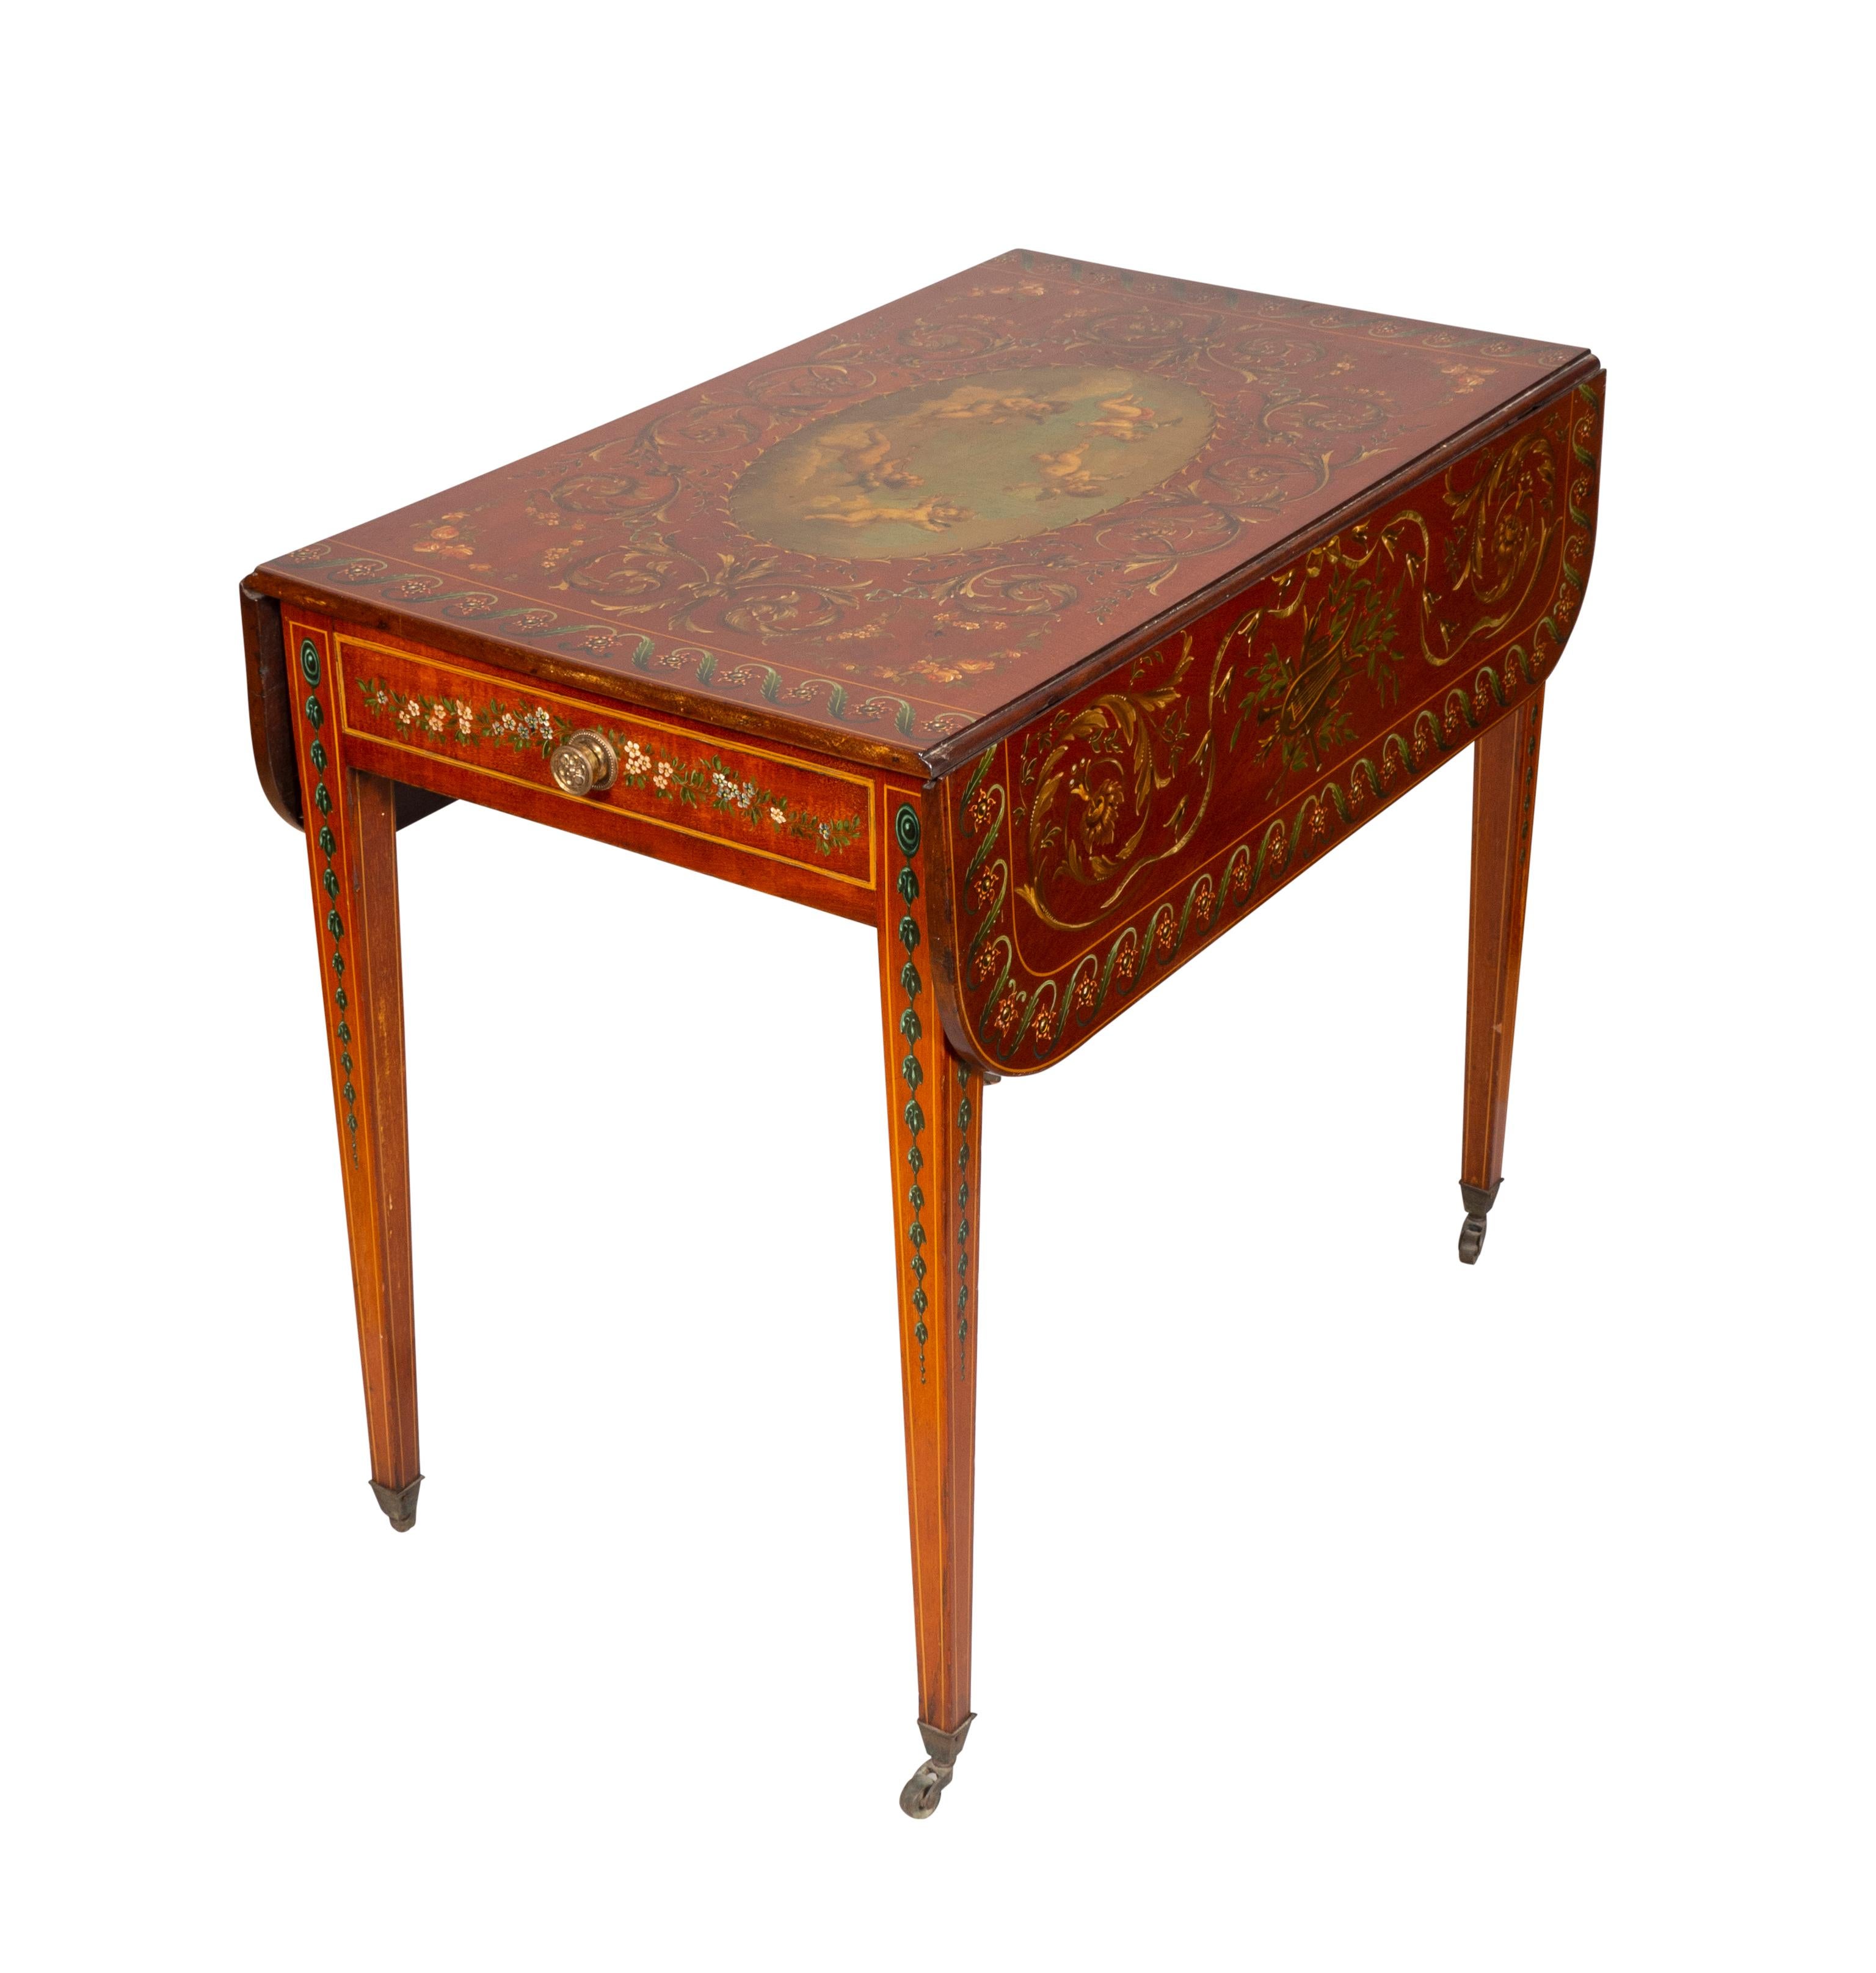 19th Century Edwardian Satinwood and Painted Pembroke Table For Sale